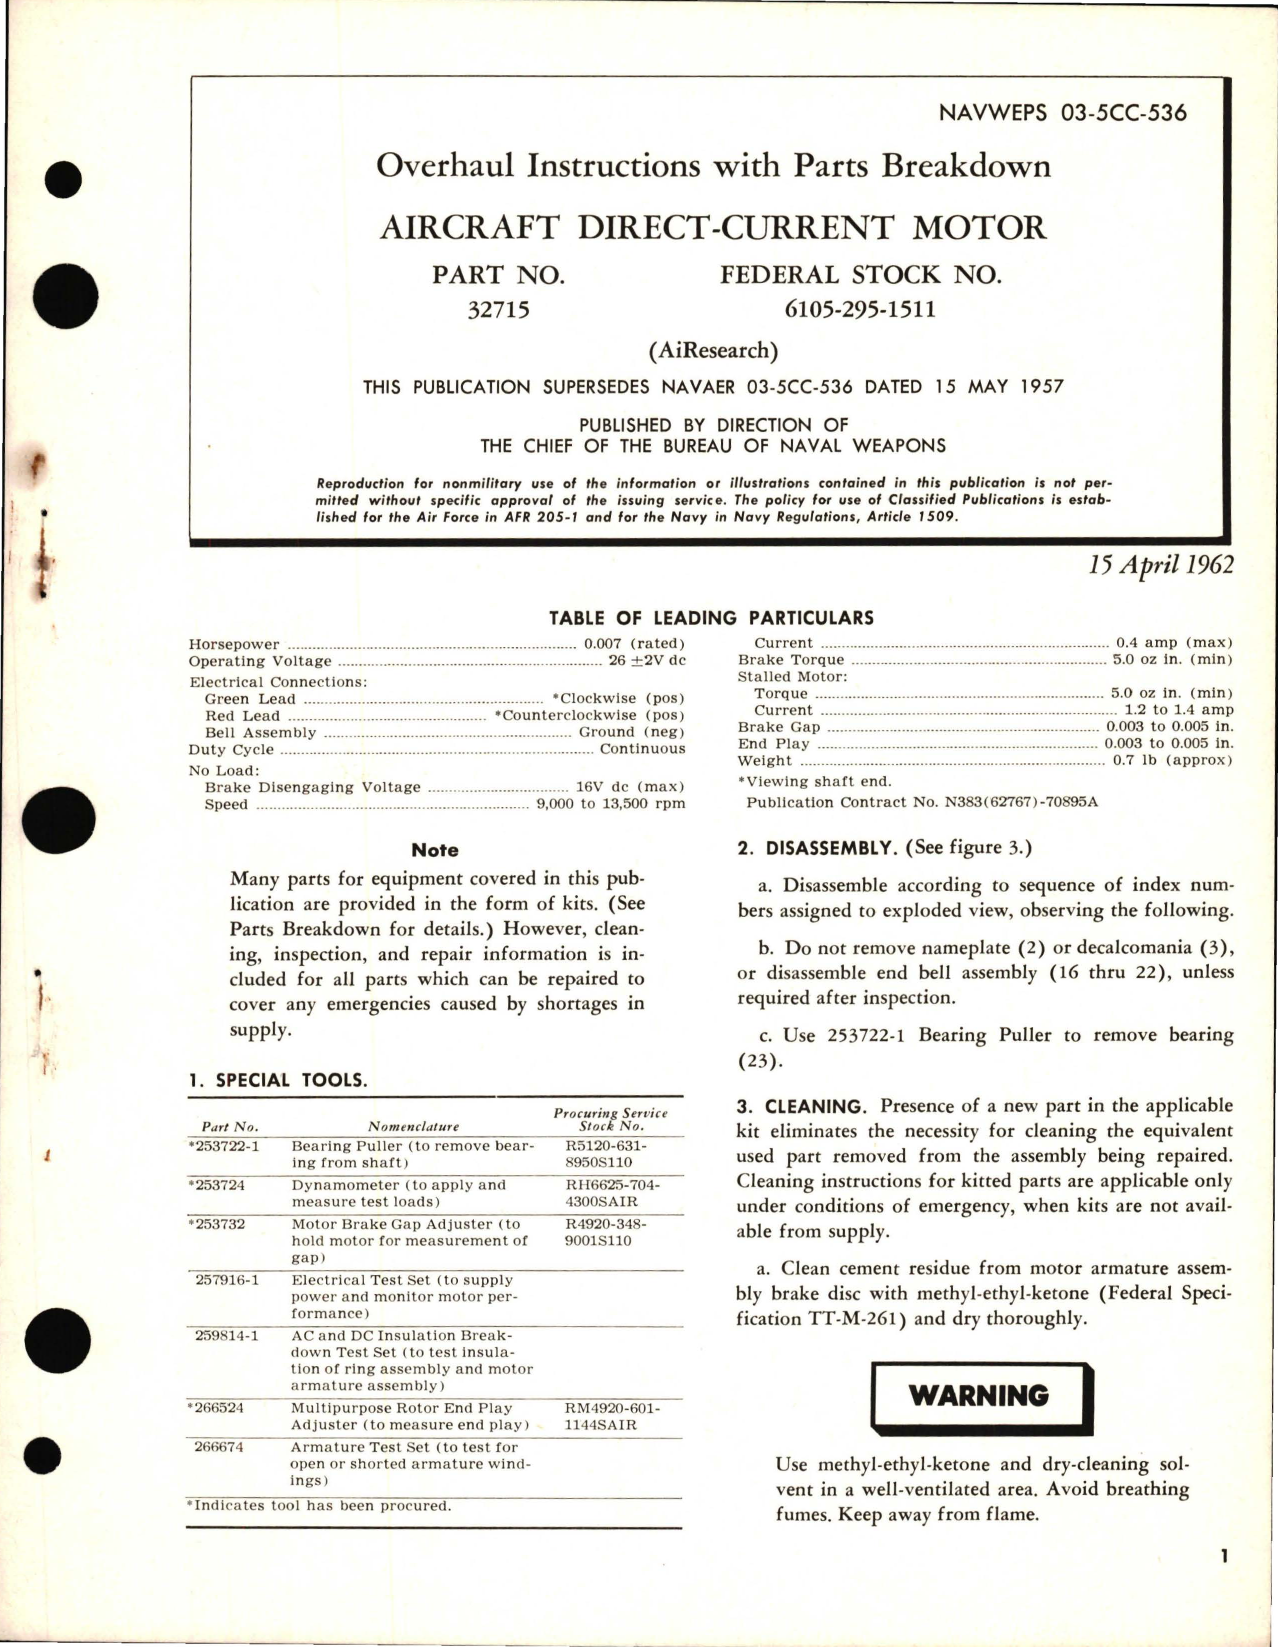 Sample page 1 from AirCorps Library document: Overhaul Instructions with Parts Breakdown for Aircraft Direct Current Motors - Part 32715 